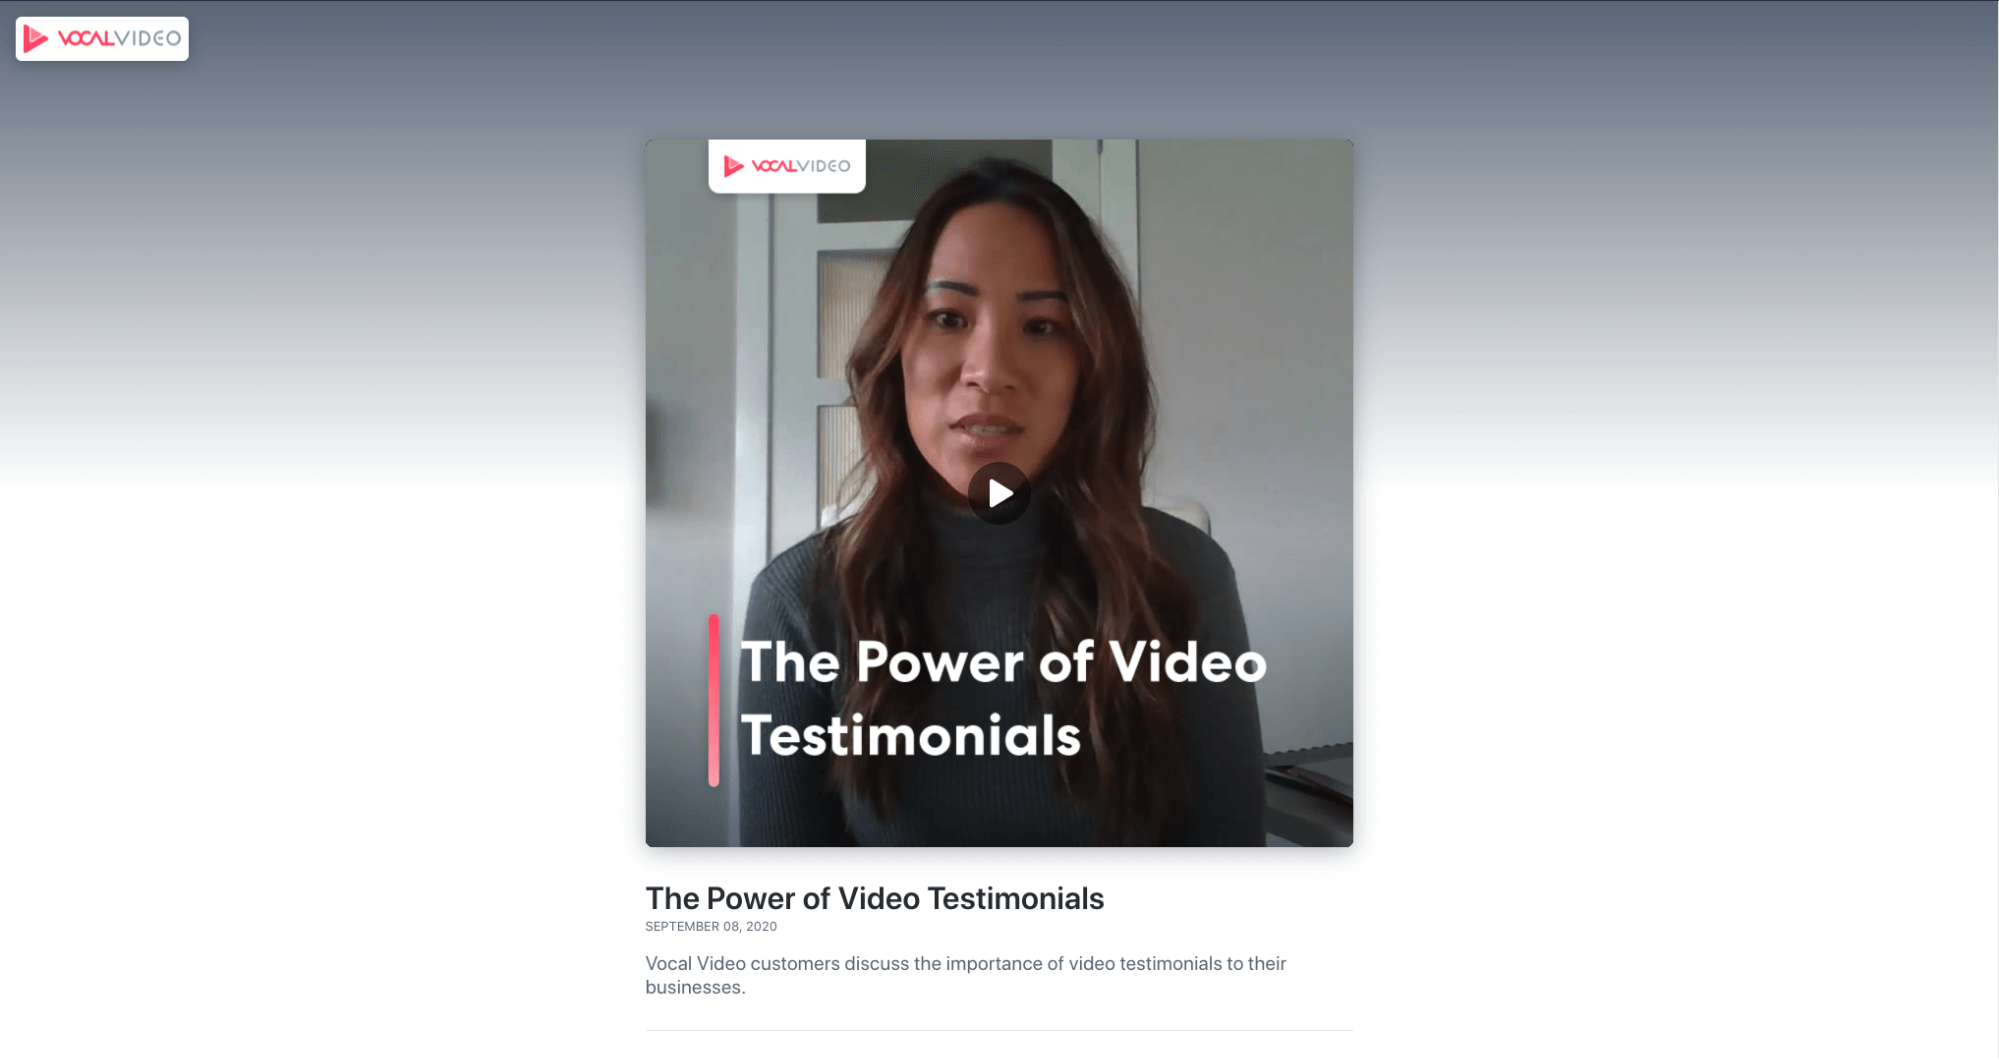 Vocal Video's video testimonial app makes it simple to collect and share video testimonials.